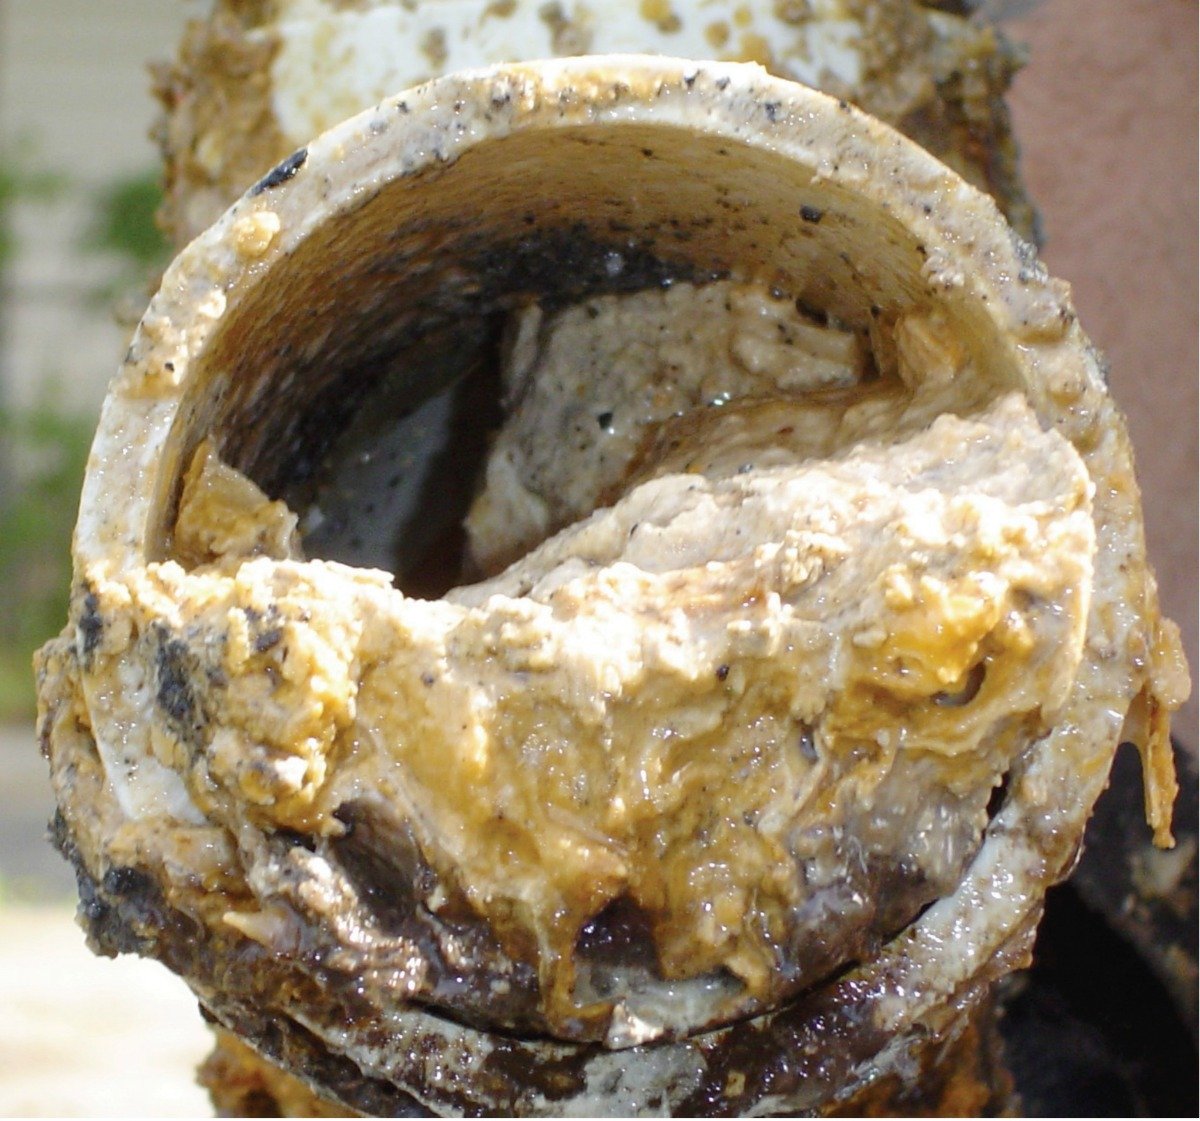 Image of a clogged commercial grease trap.